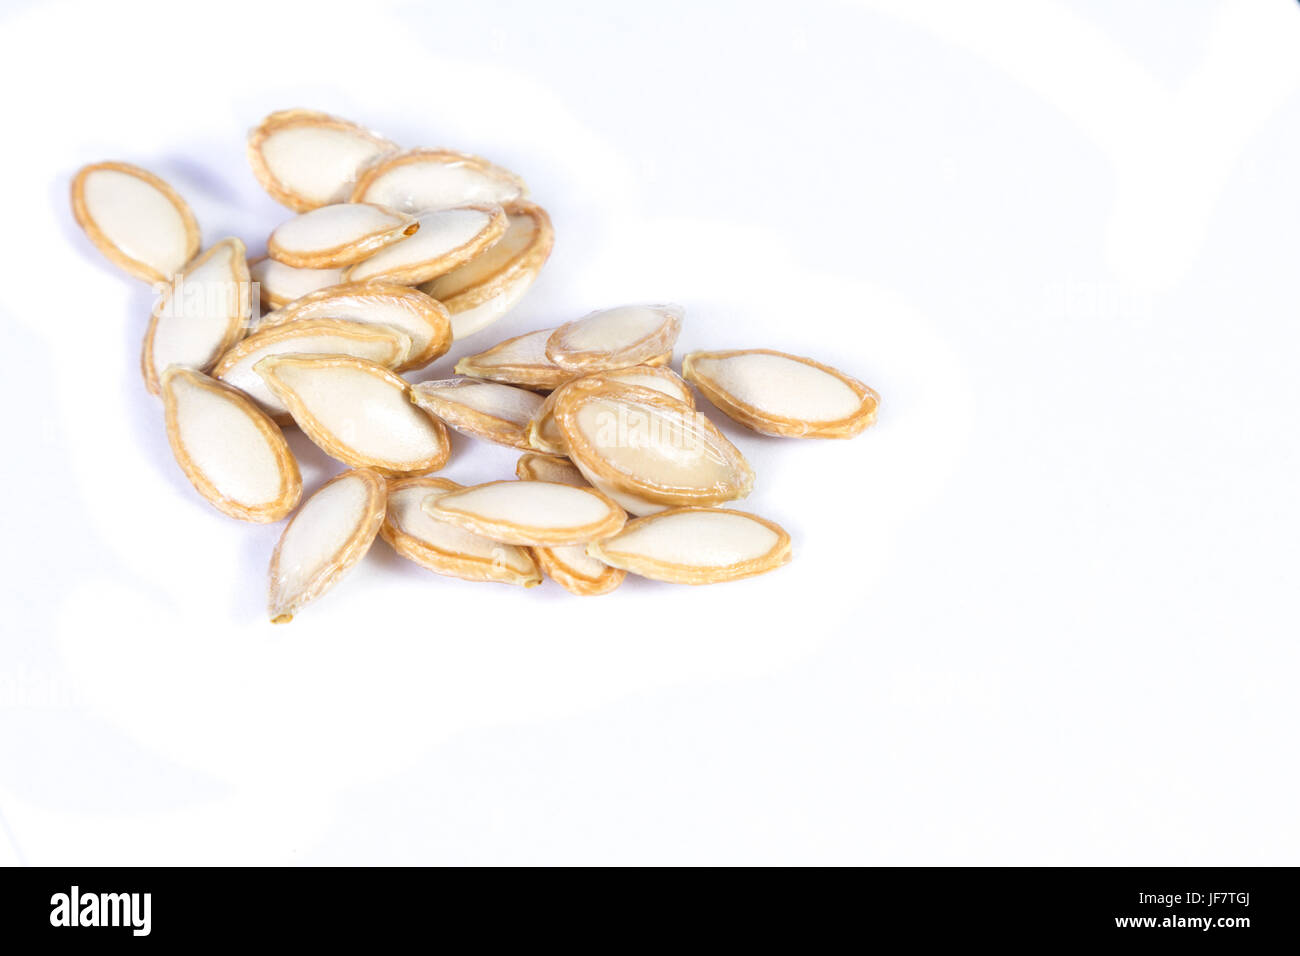 close up of a pile of raw pumpkin seeds isolated on a white background Stock Photo